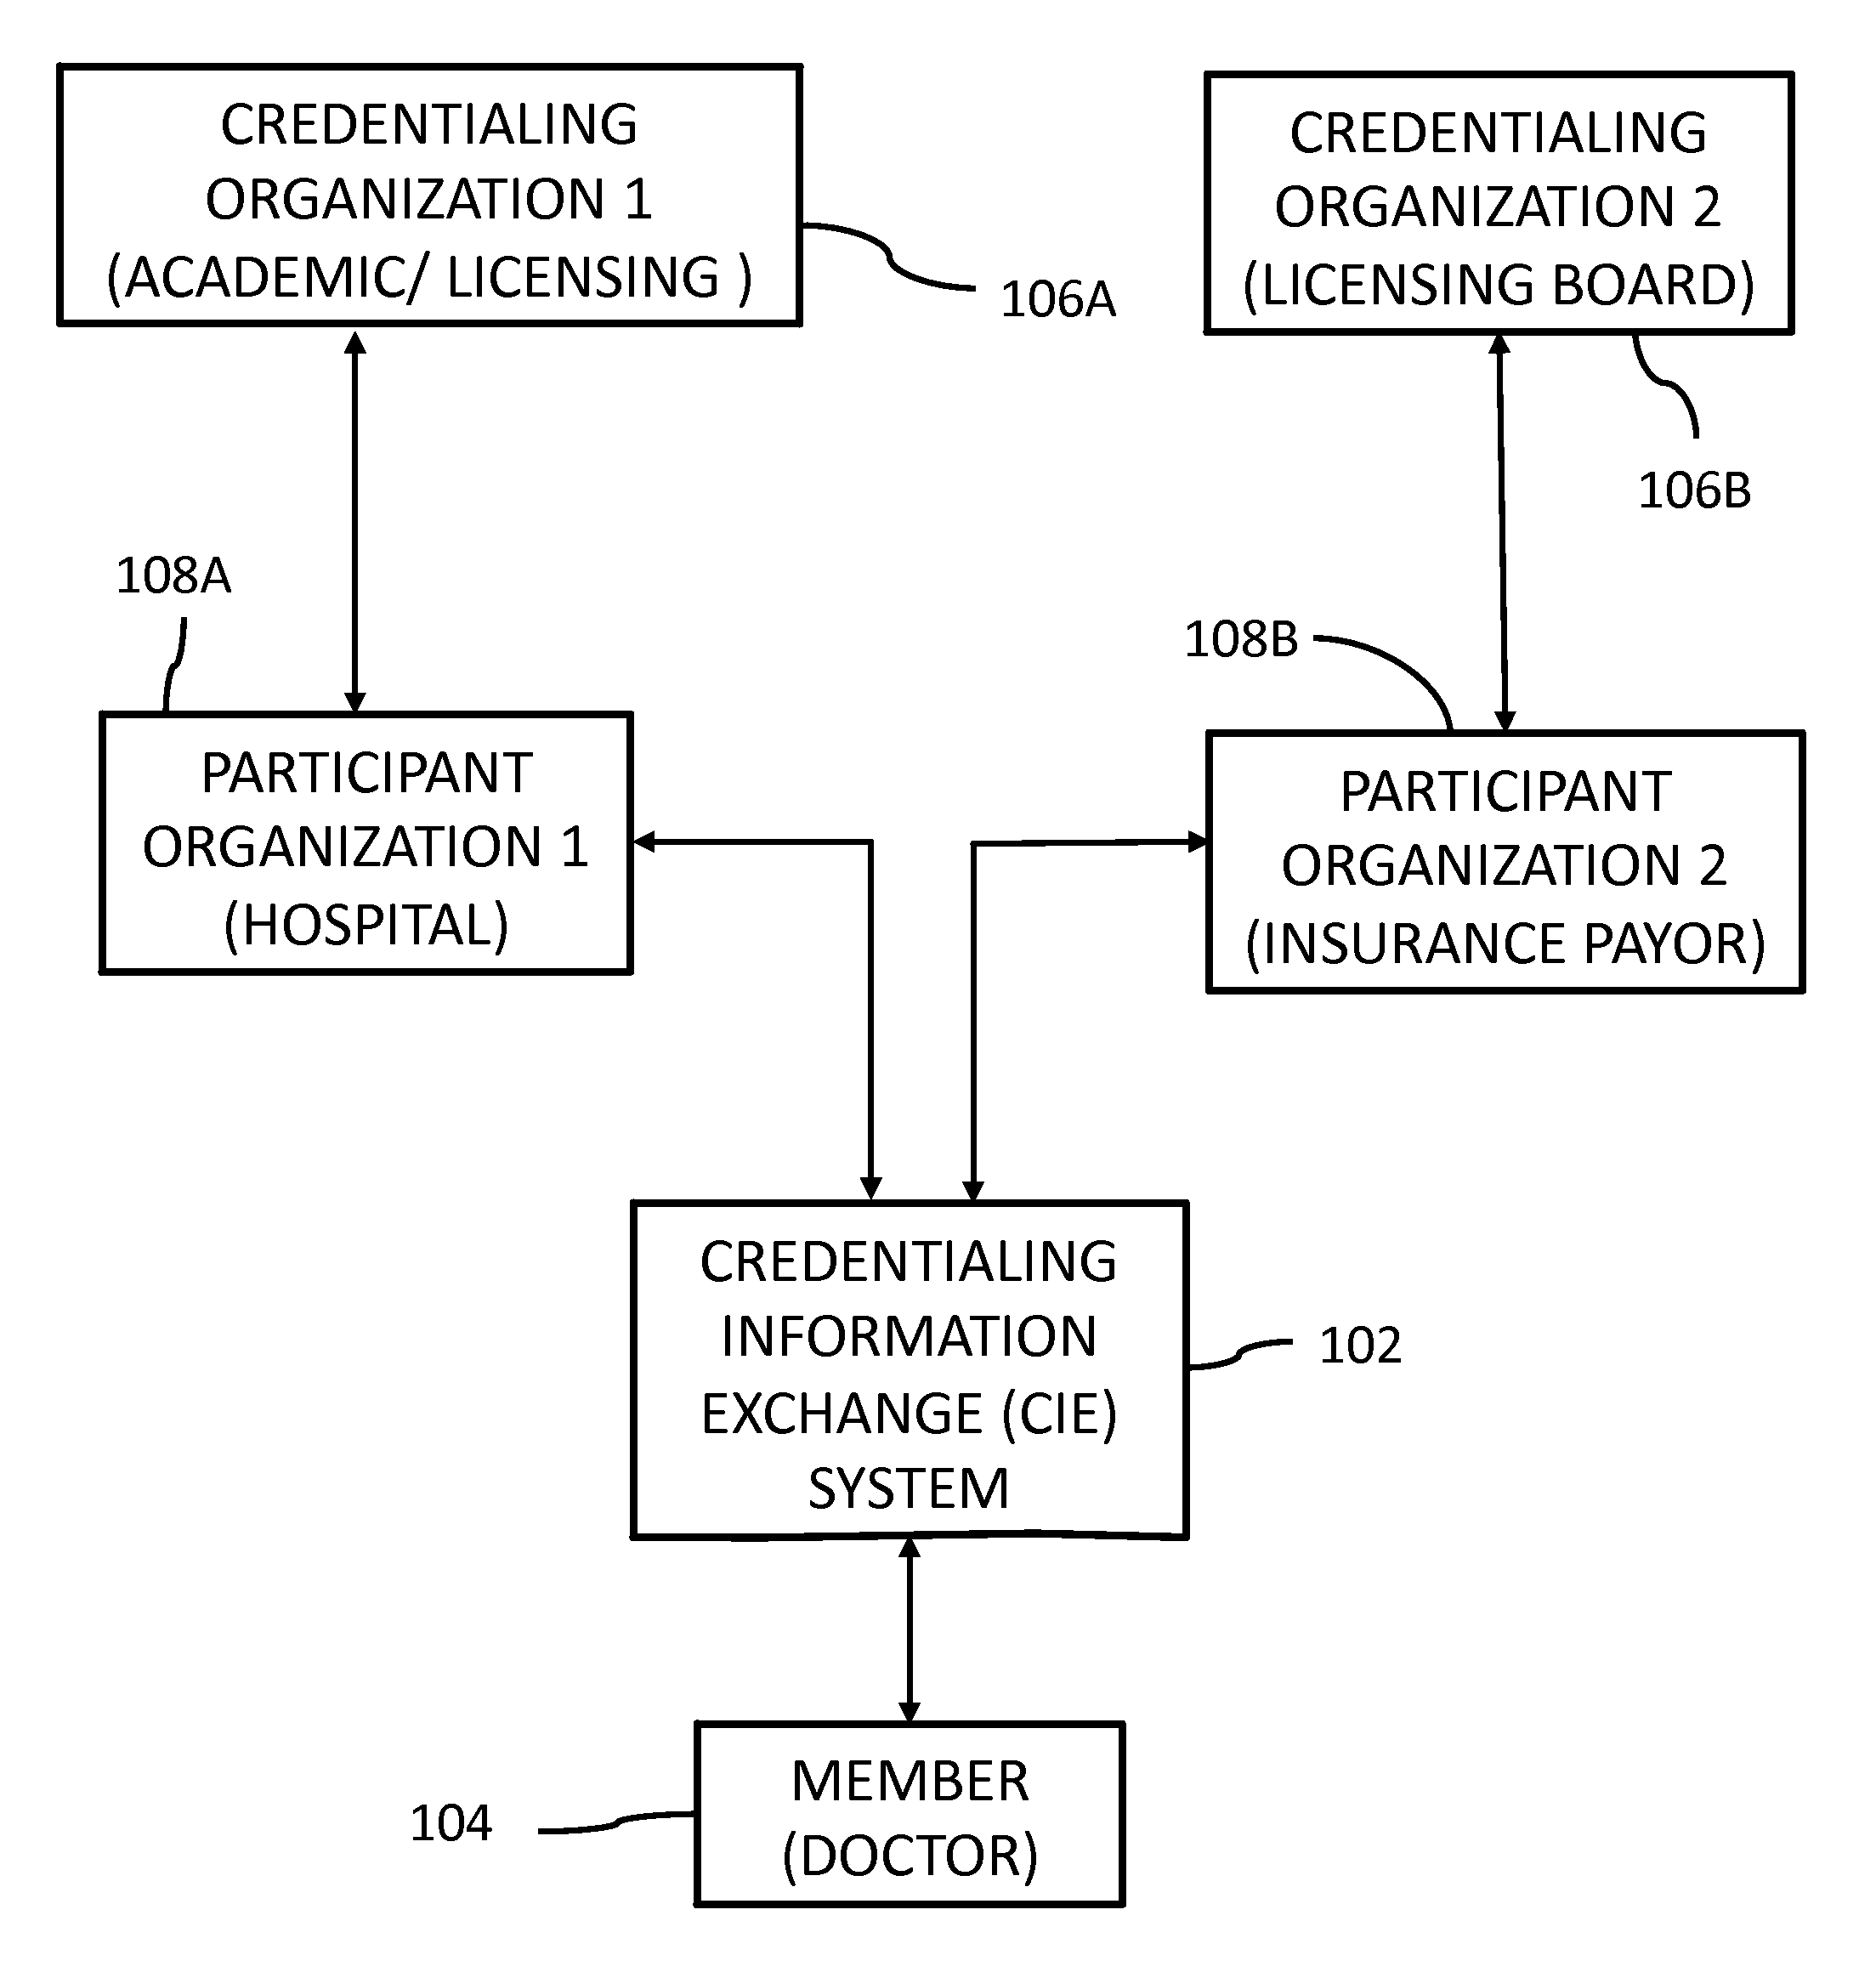 System and Method for Exchanging and Updating Credentialing Information